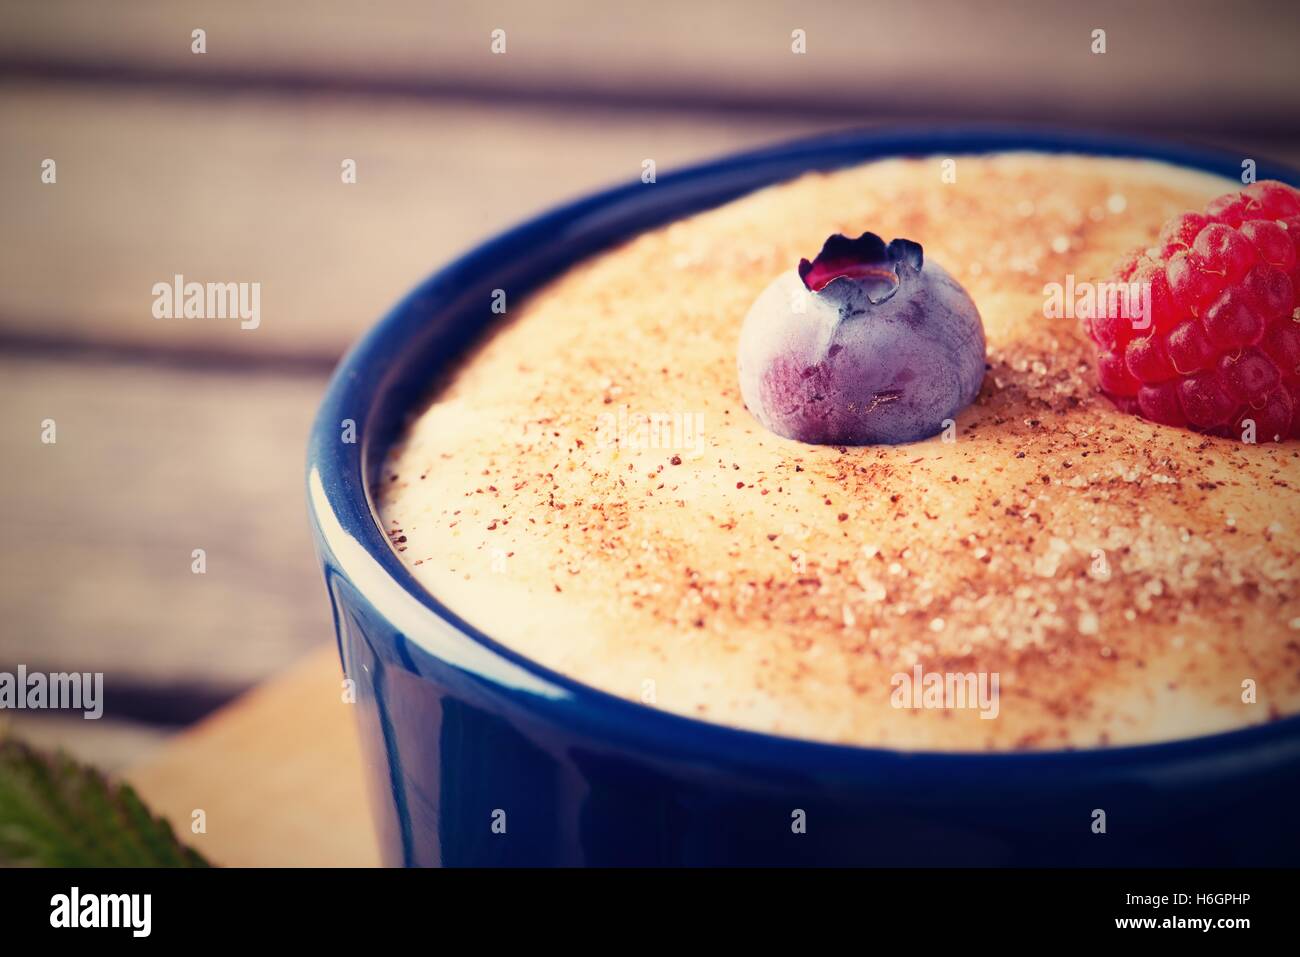 Horizontal vintage retro photo of creamy dessert in blue bowl. Cinnamon sugar is on the surface with single blueberry and red ra Stock Photo